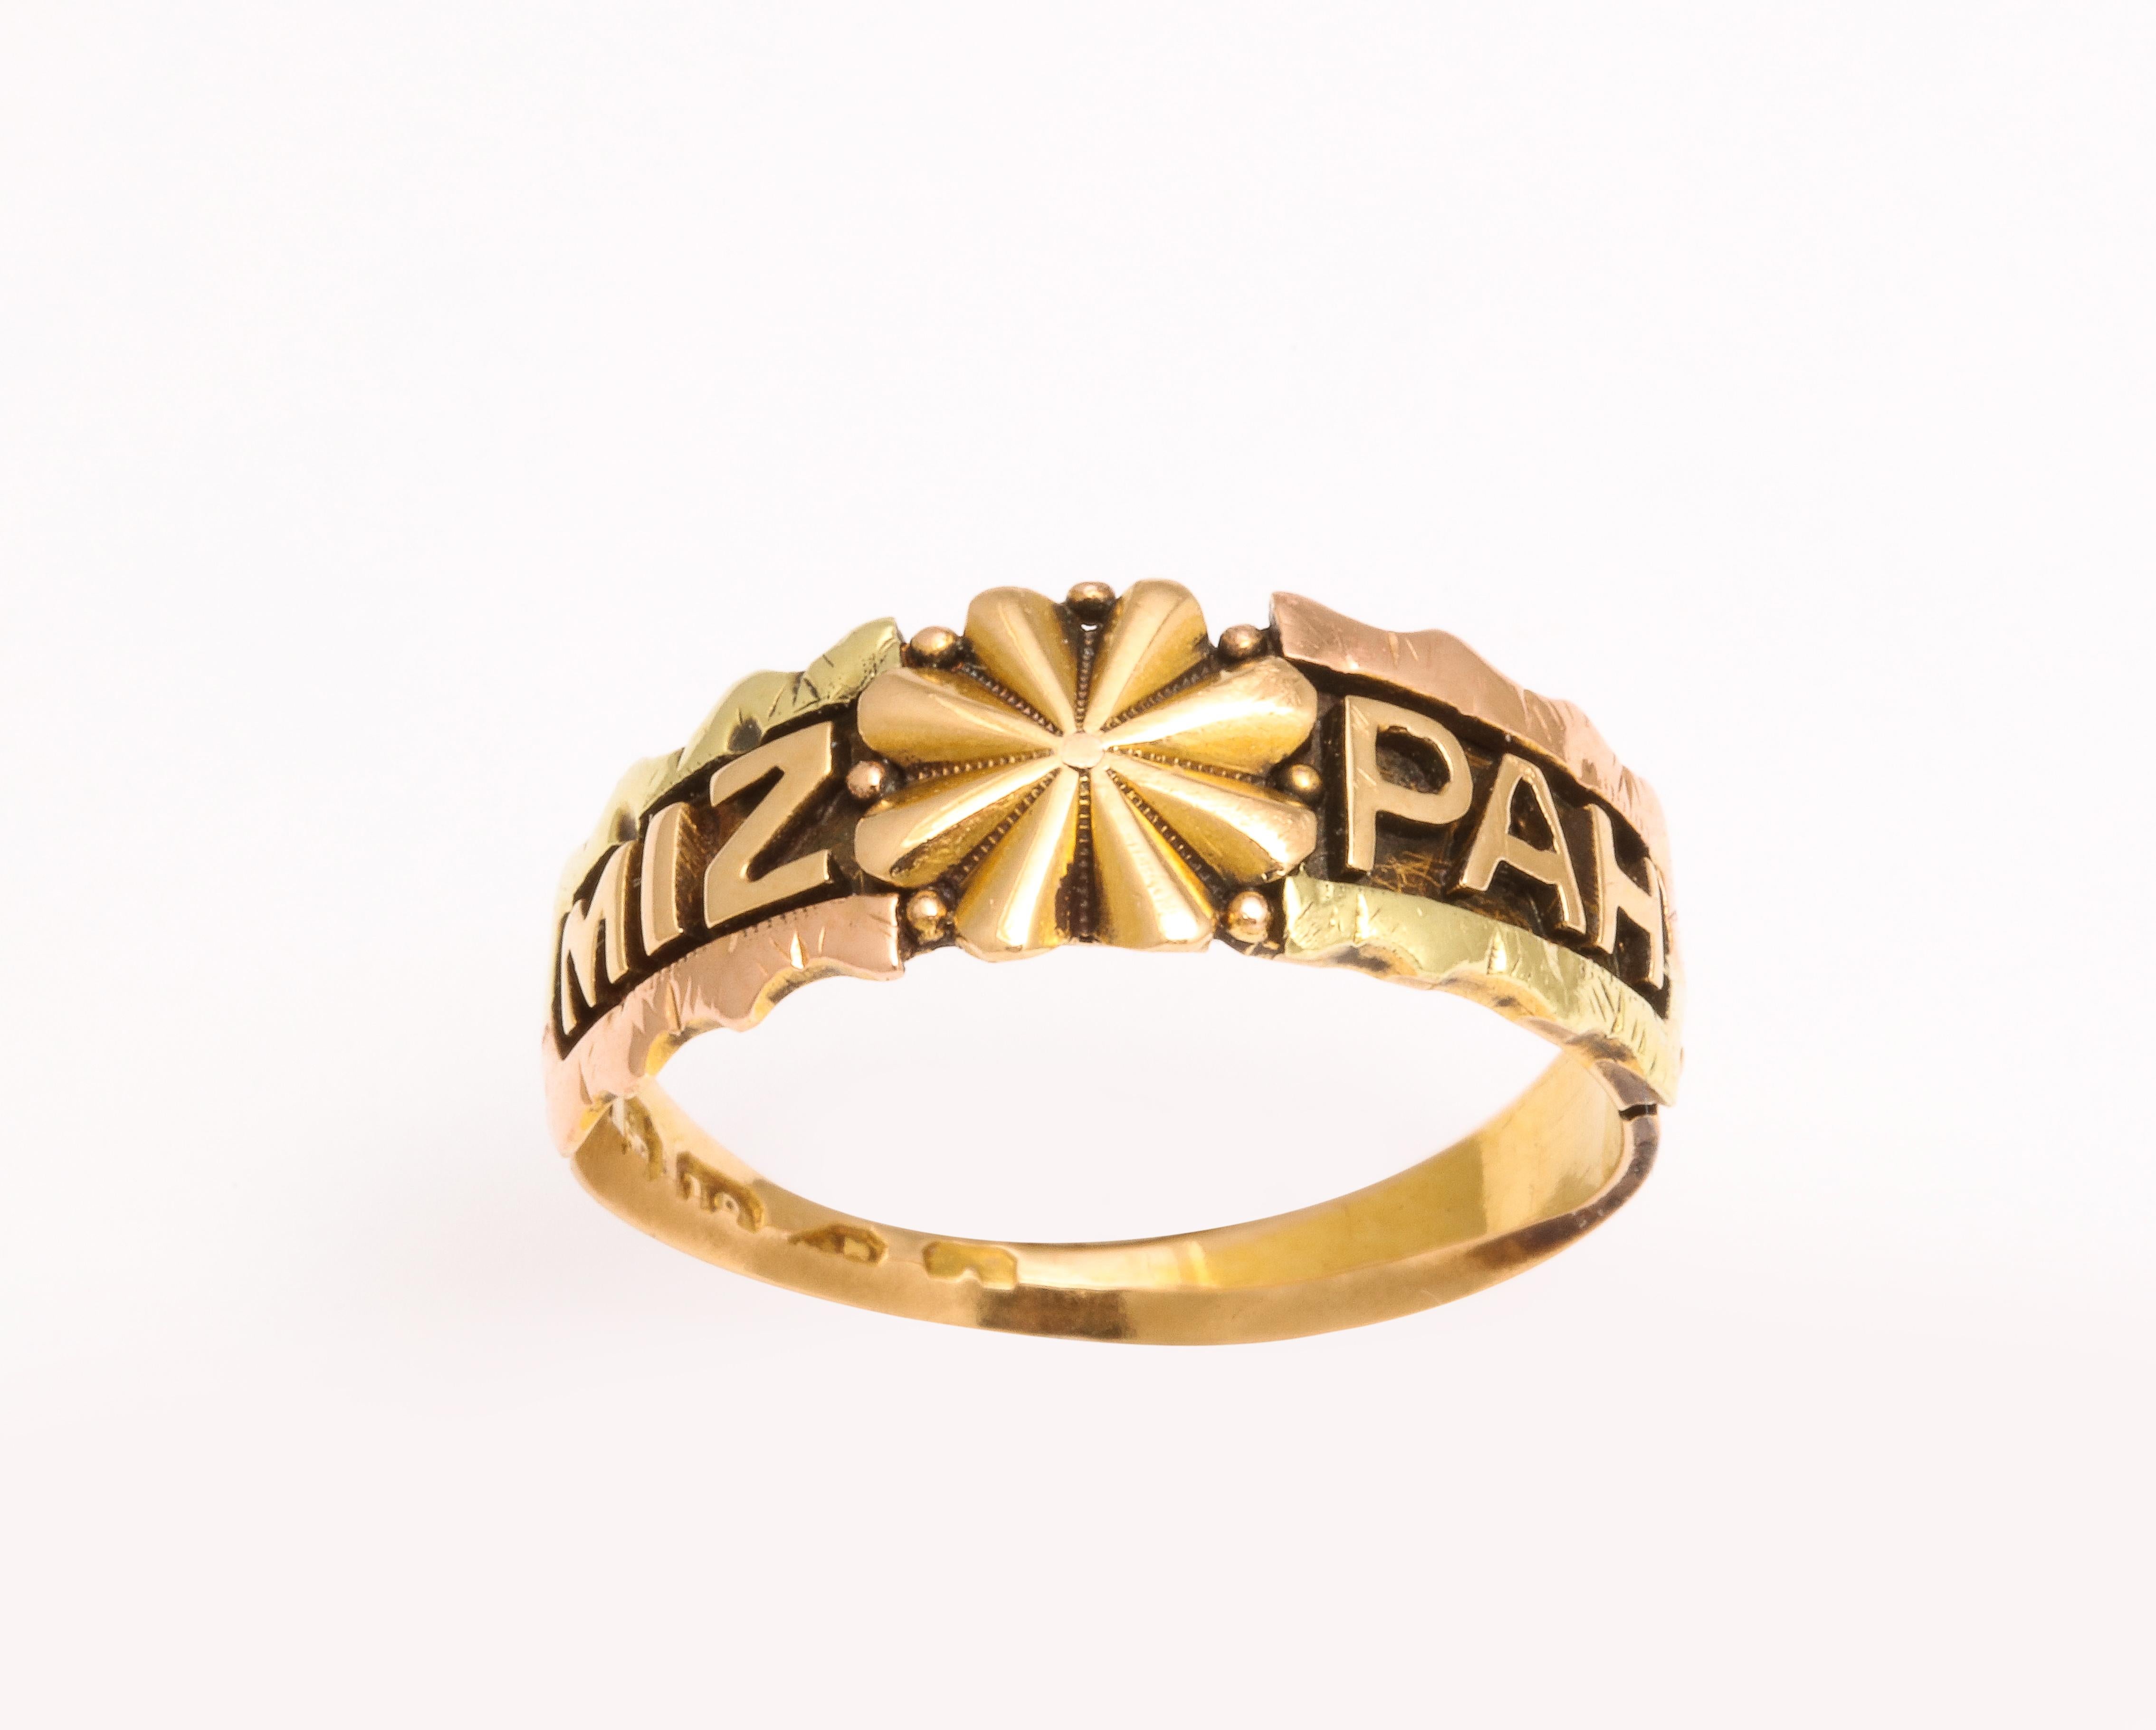 In striking contrast, this Mizpah ring was created c. 1870 in 18 Kt gold. In striking contrast with no wear, the word Mispah is raised in gold letters on a darker gold  background. The borders are scalloped. A gold daisy is at the middle of the